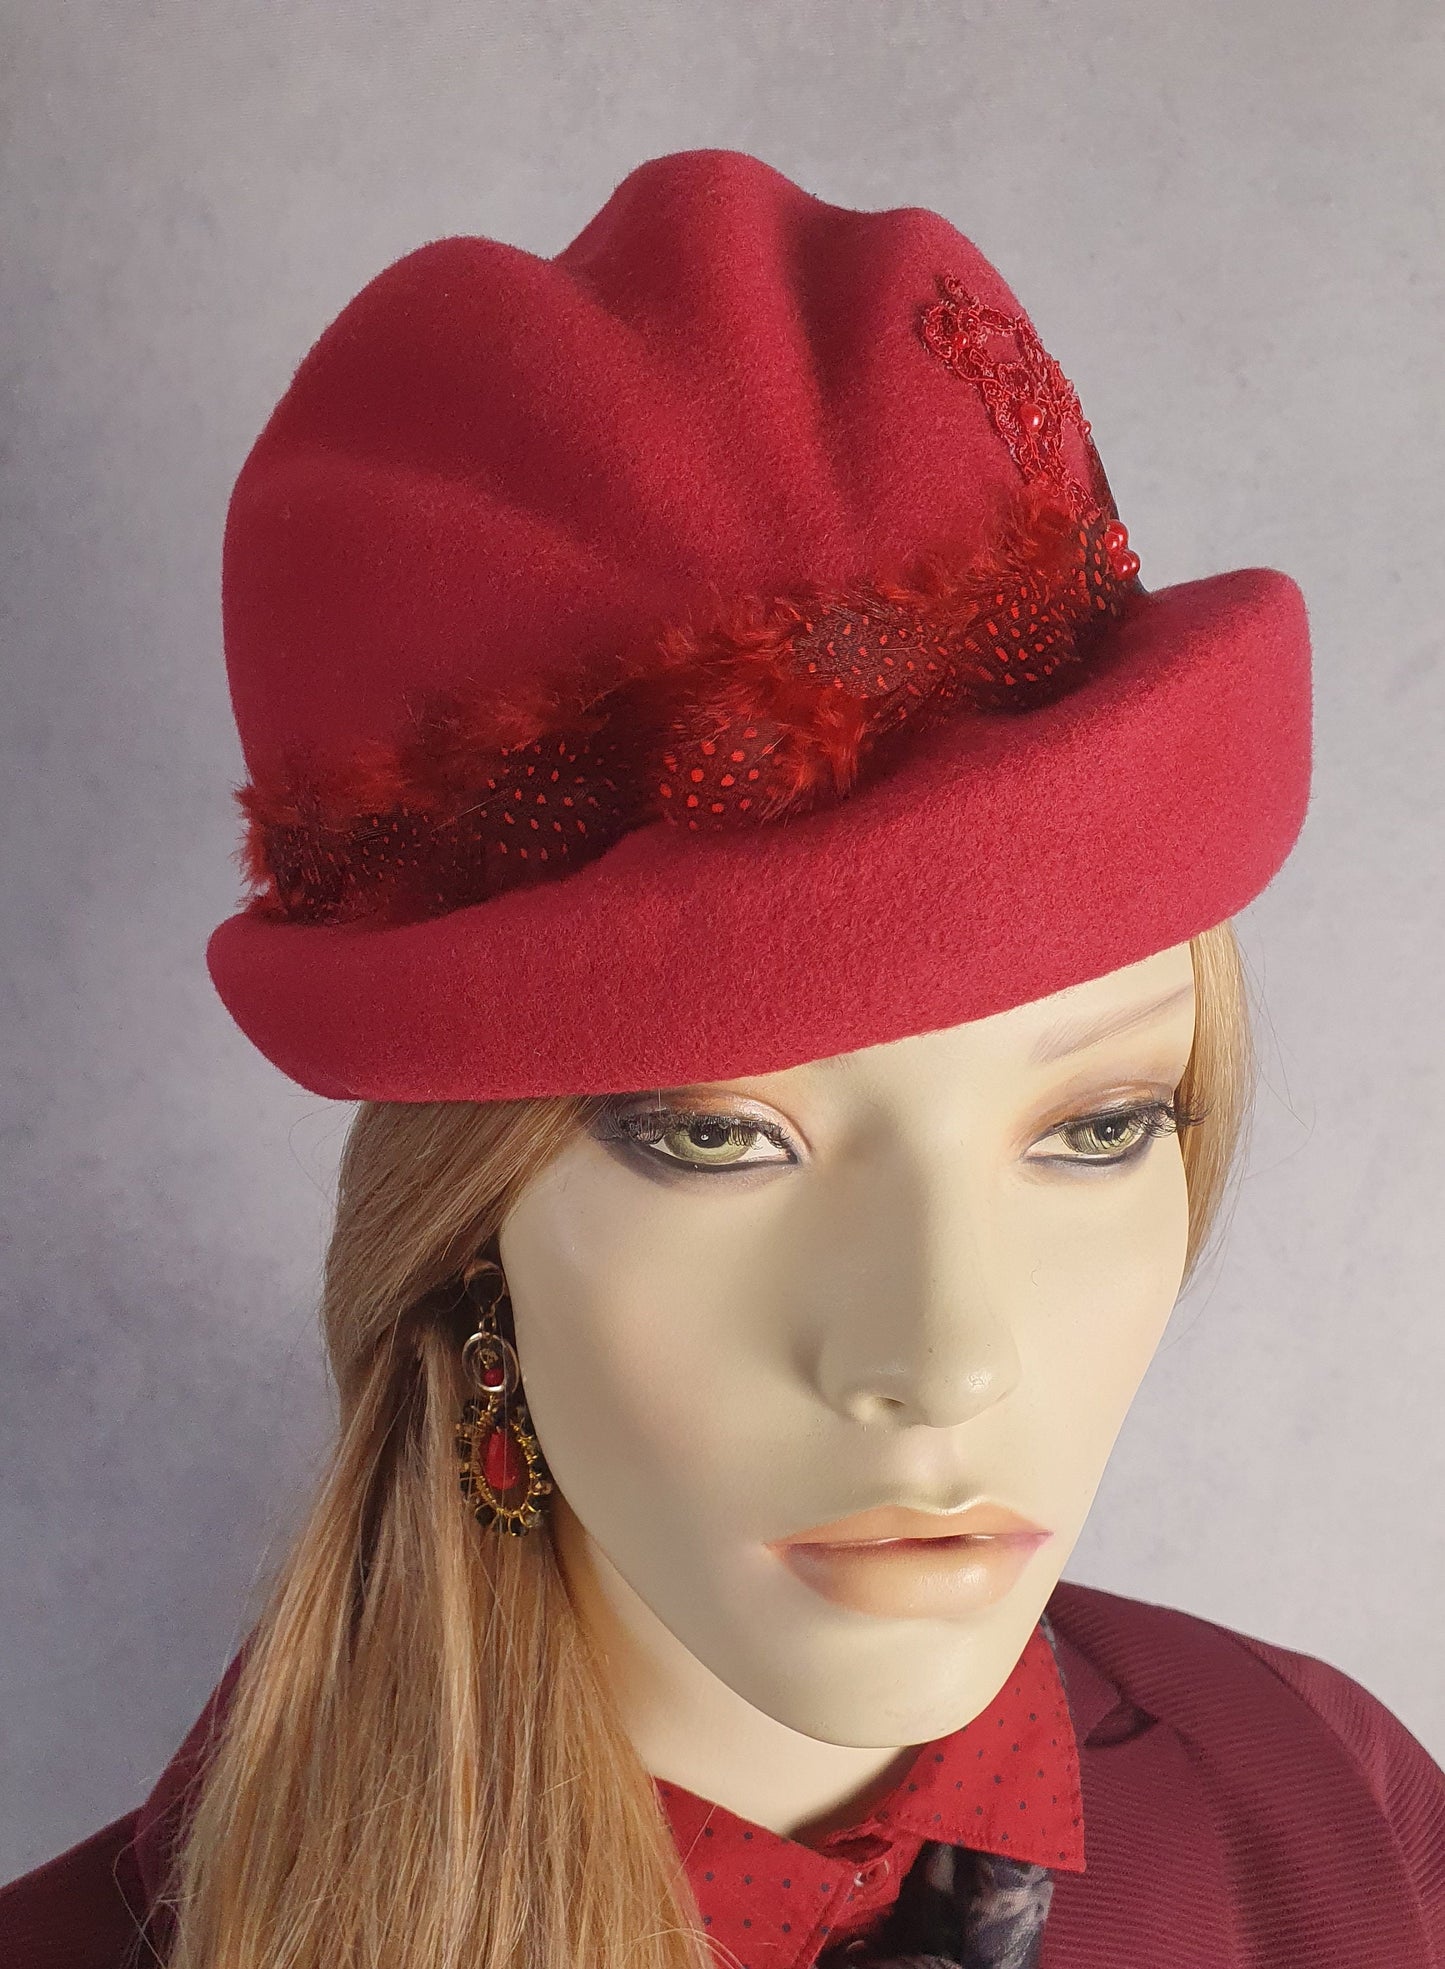 Handmade felt hat in burgundy red, elegant vintage hat with pheasant feathers - Perfect for autumn &amp; winter and special occasions